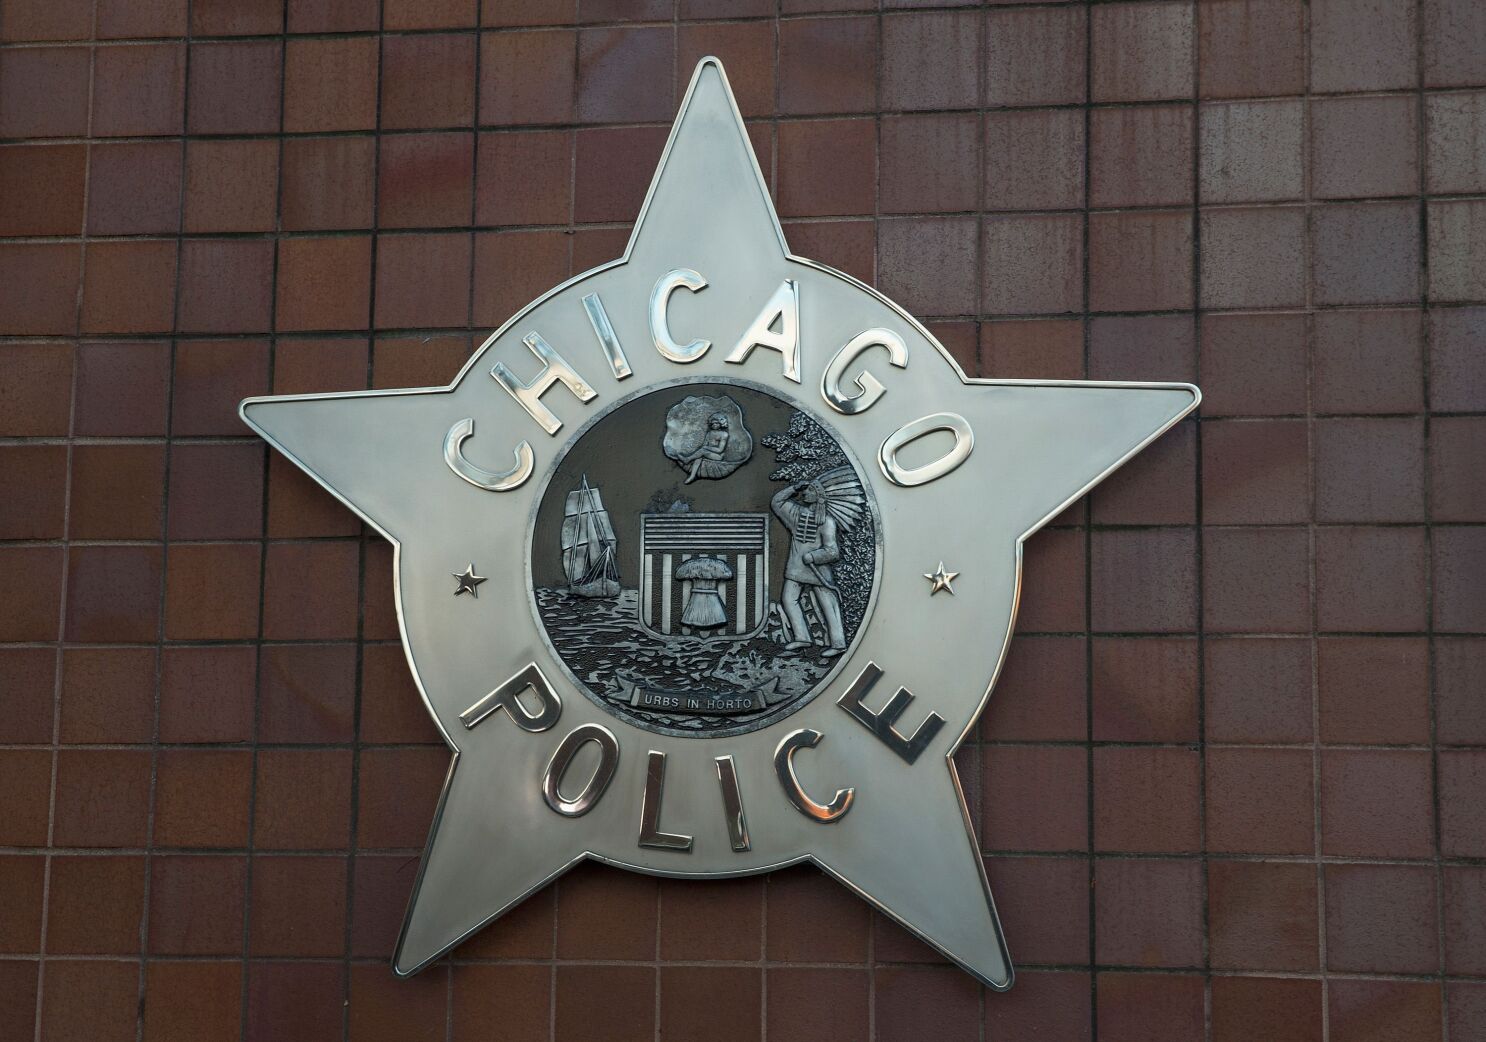 Chicago Sun-Times 63% of traffic stops in Chicago targeted African Americans last year, state report shows - Chicago Sun-Times